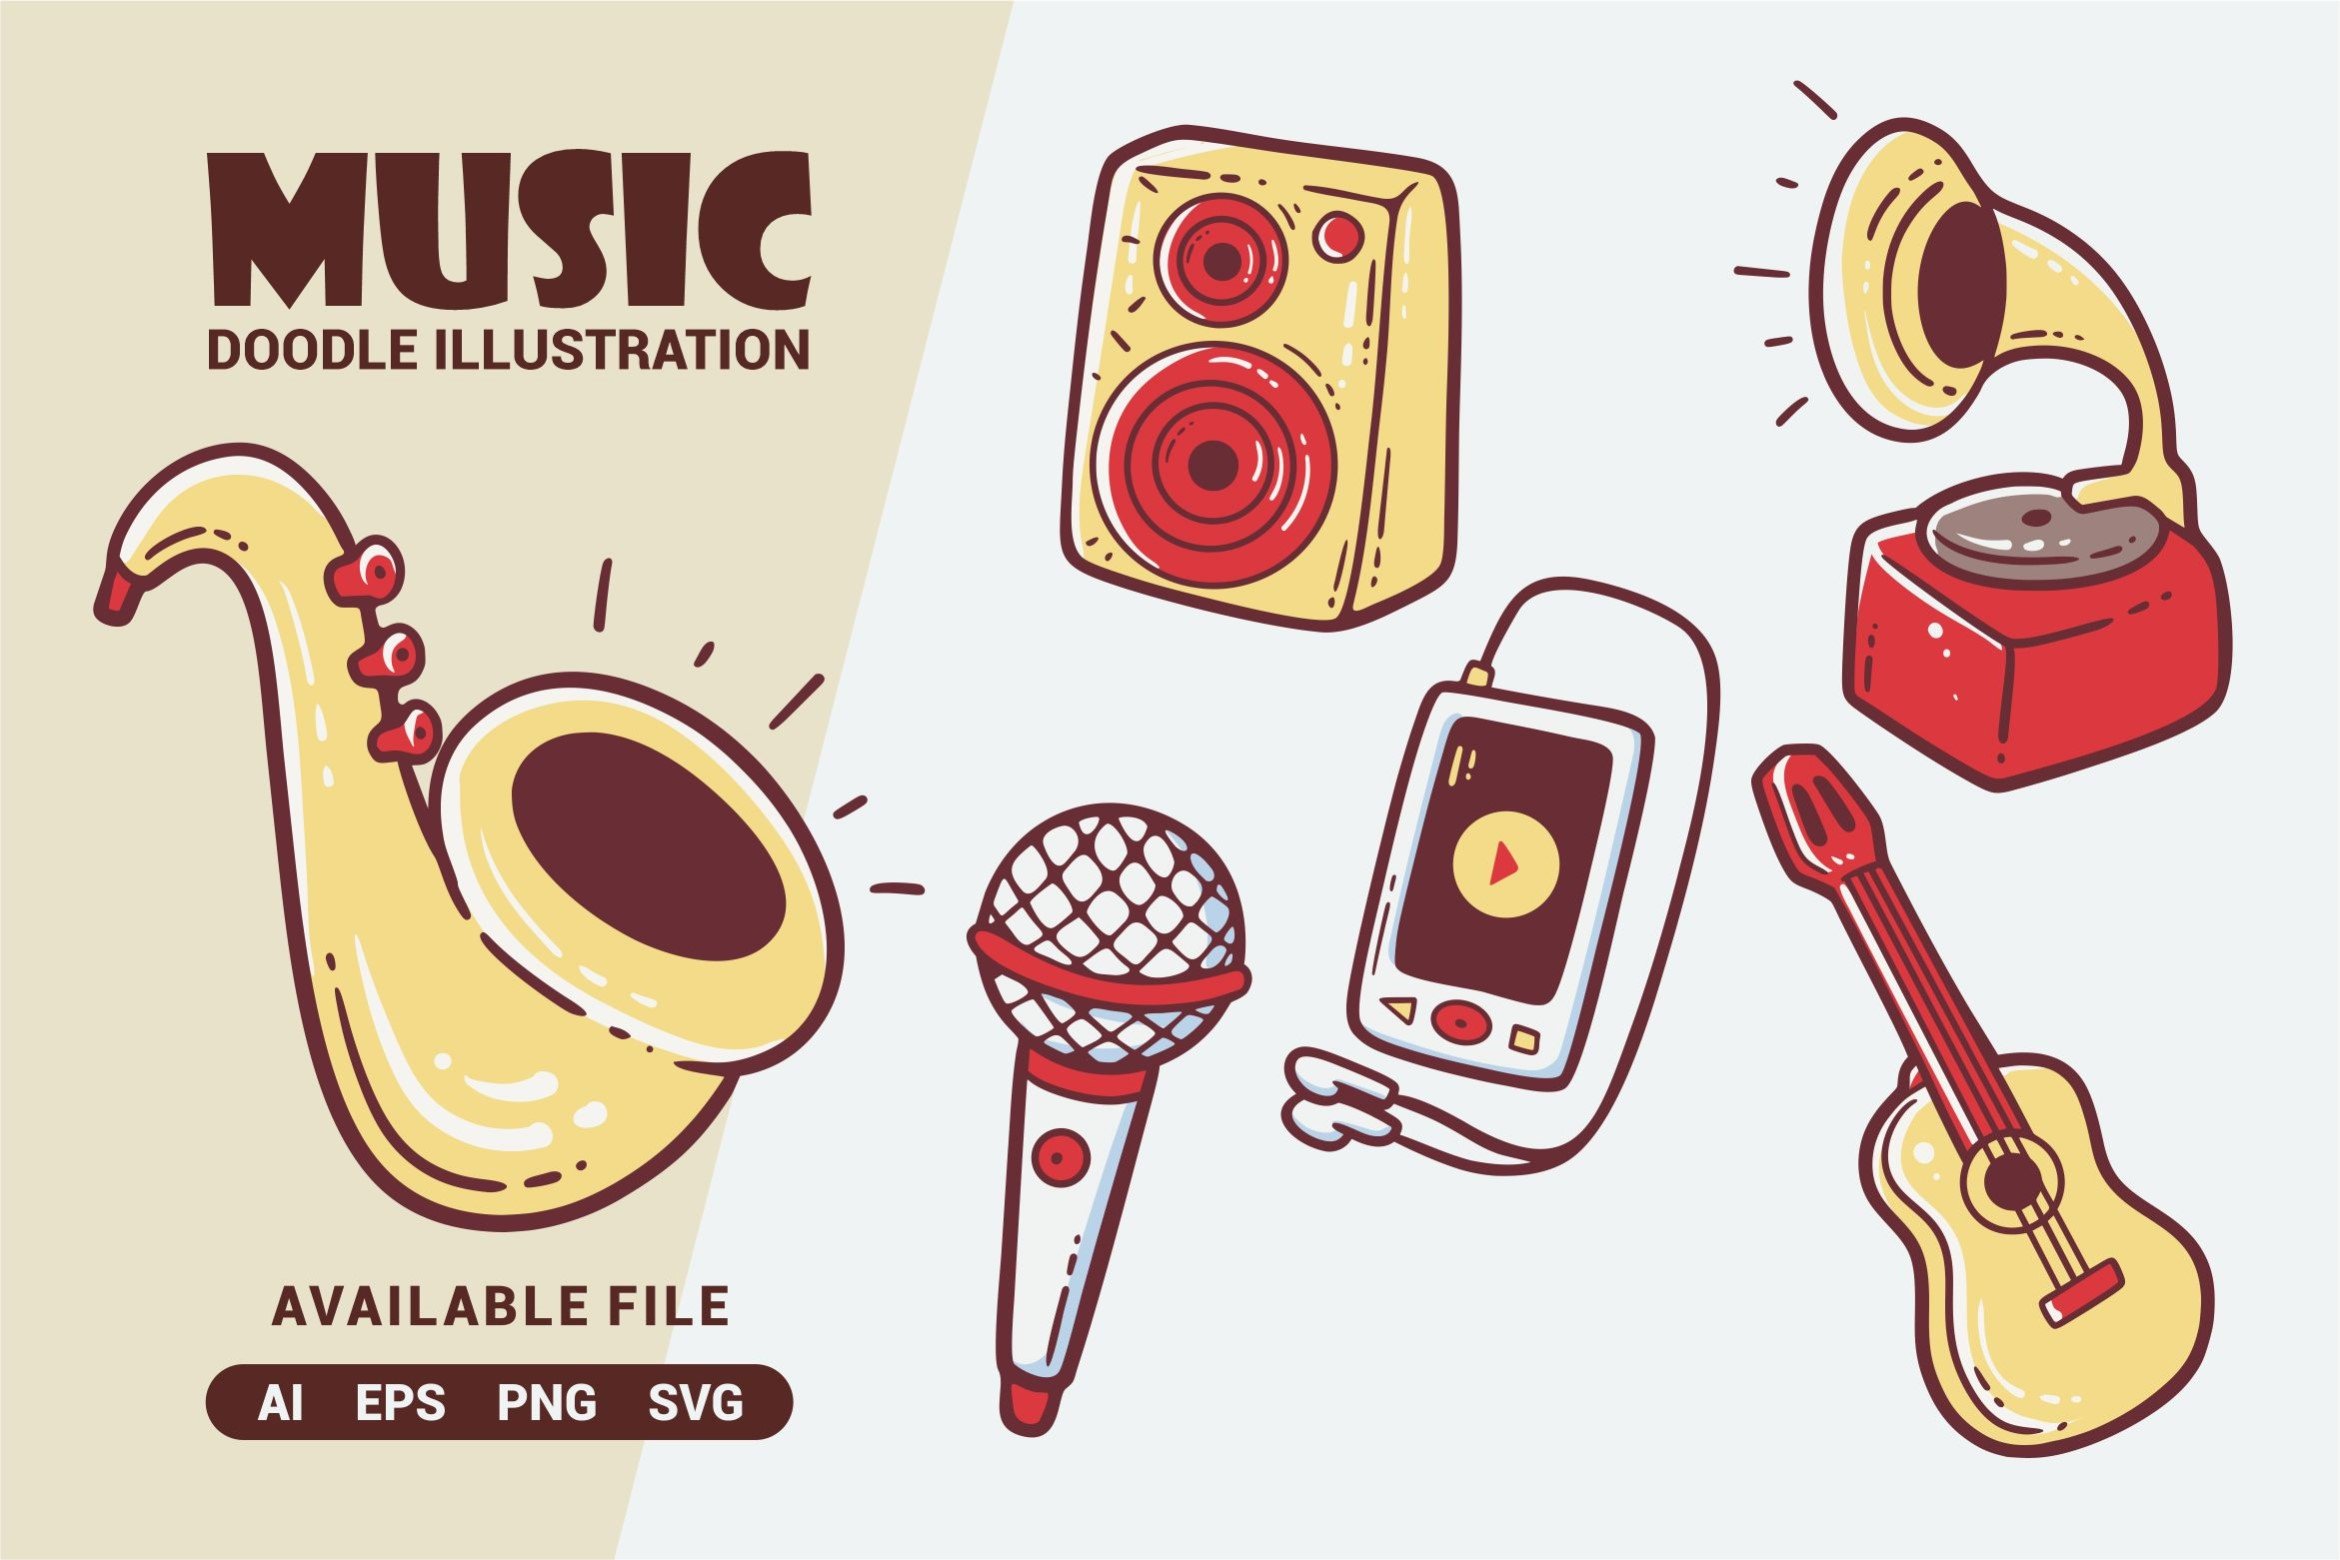 Music Doodle Illustration cover image.